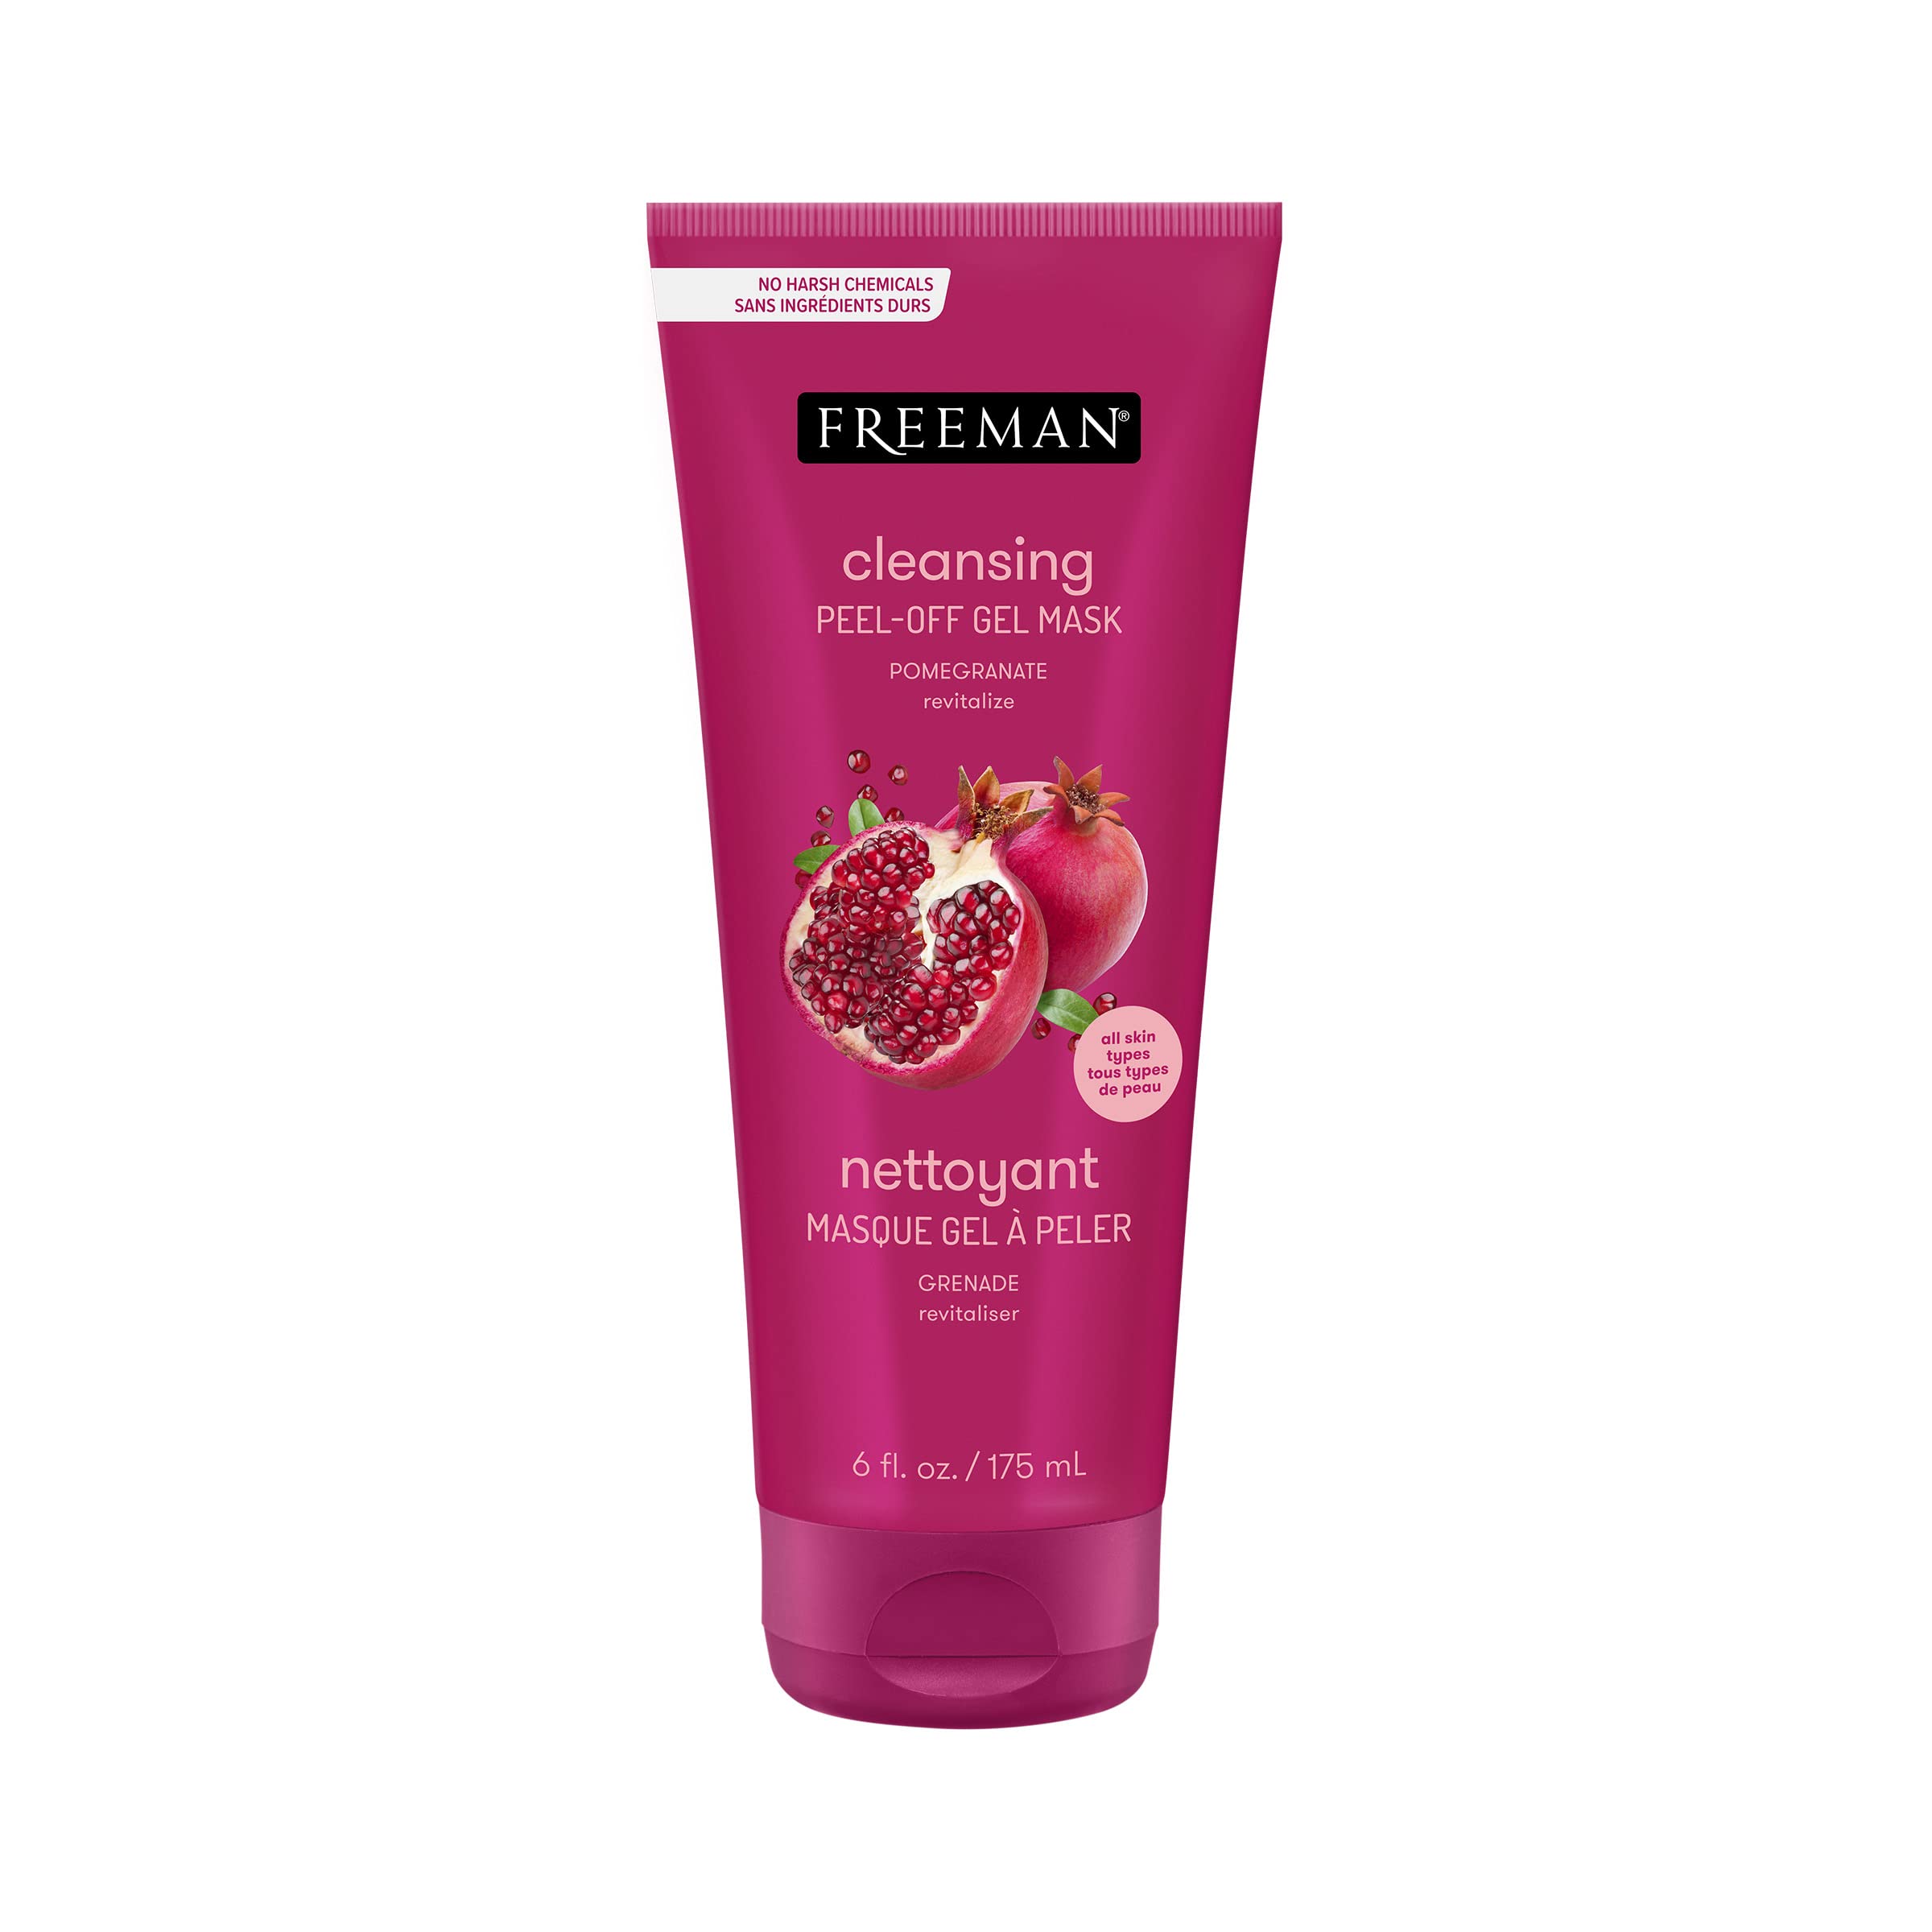 FREEMAN Cleansing Pomegranate Peel-Off Gel Facial Mask, Shrinks Pores, Purifies Skin, Made With 8 Different Antioxidants, Protects Skin, 6 fl. oz./175 ml Tubes